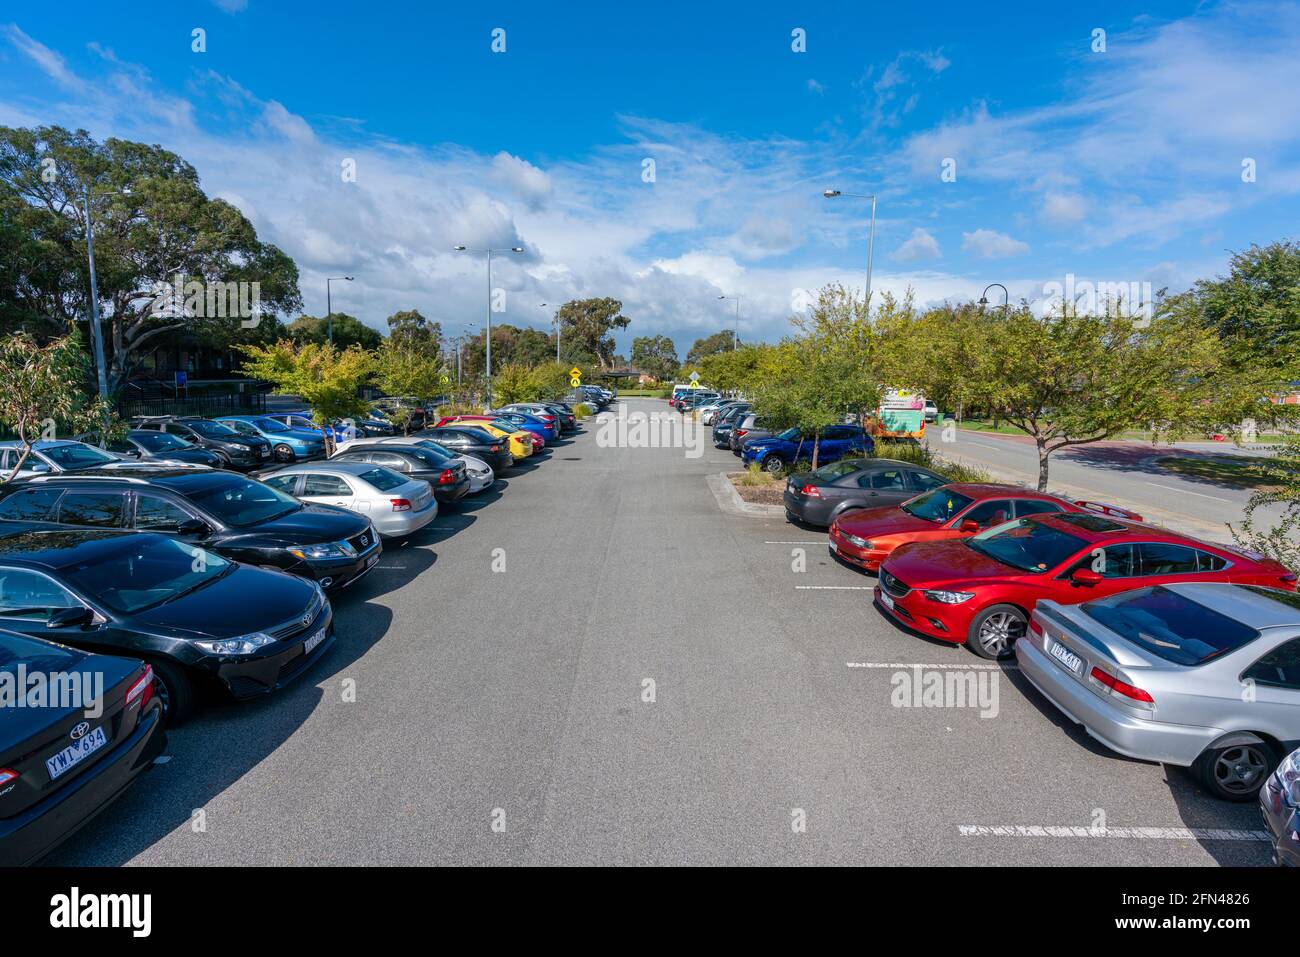 View of full car park at the Lyndhurst Railway Station in Melbourne, Australia Stock Photo